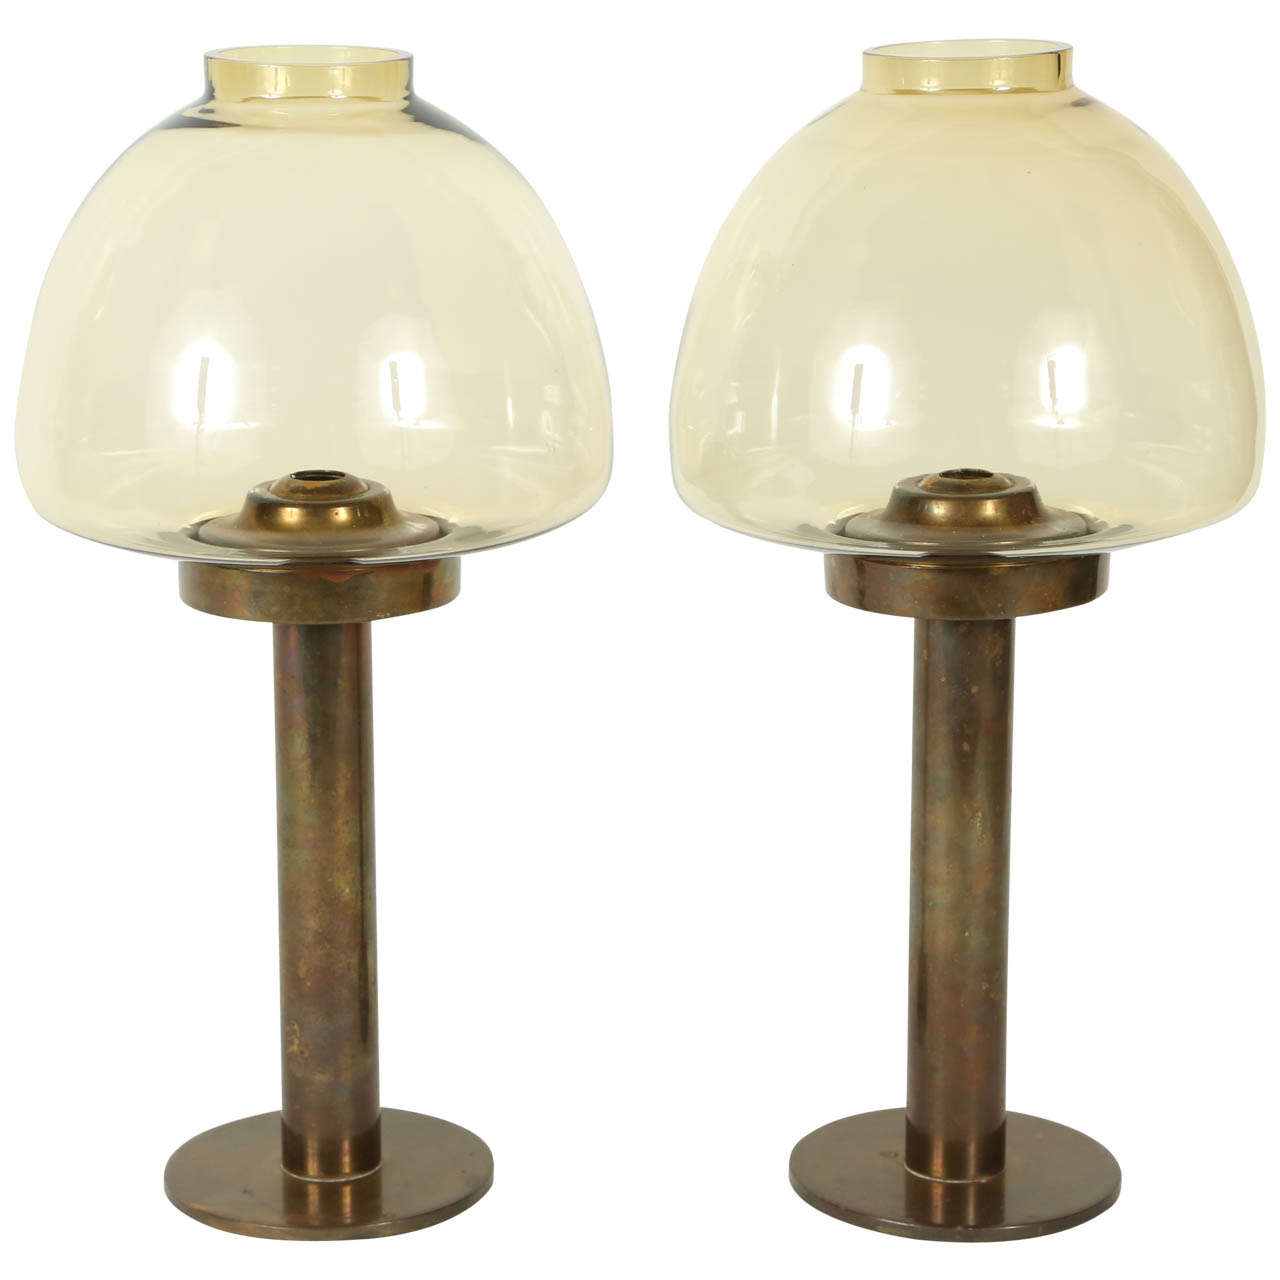 Rare Pair of "Hurricane" Candle Lanterns by Hans Agne Jakobsson For Sale